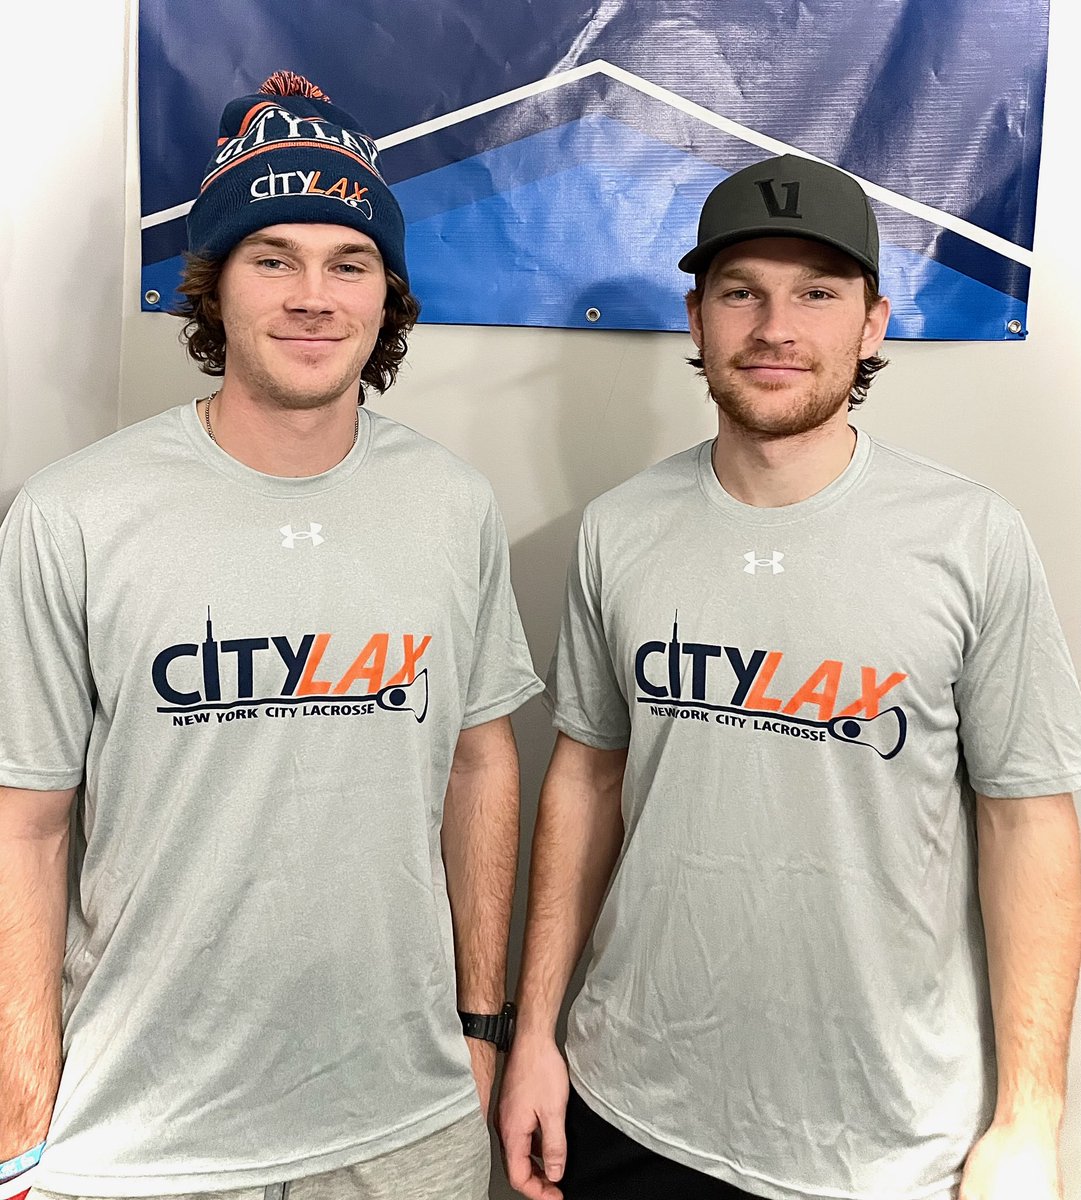 BREAKING: Pat and Chris Kavanagh are joining @CityLaxNYC as ambassadors this season and are bringing back the #GBsforNYC campaign. The @NDlacrosse All-Americans will donate $10 for every ground ball this season to @CityLaxNYC. Fans can join the Kavs and match the donation.